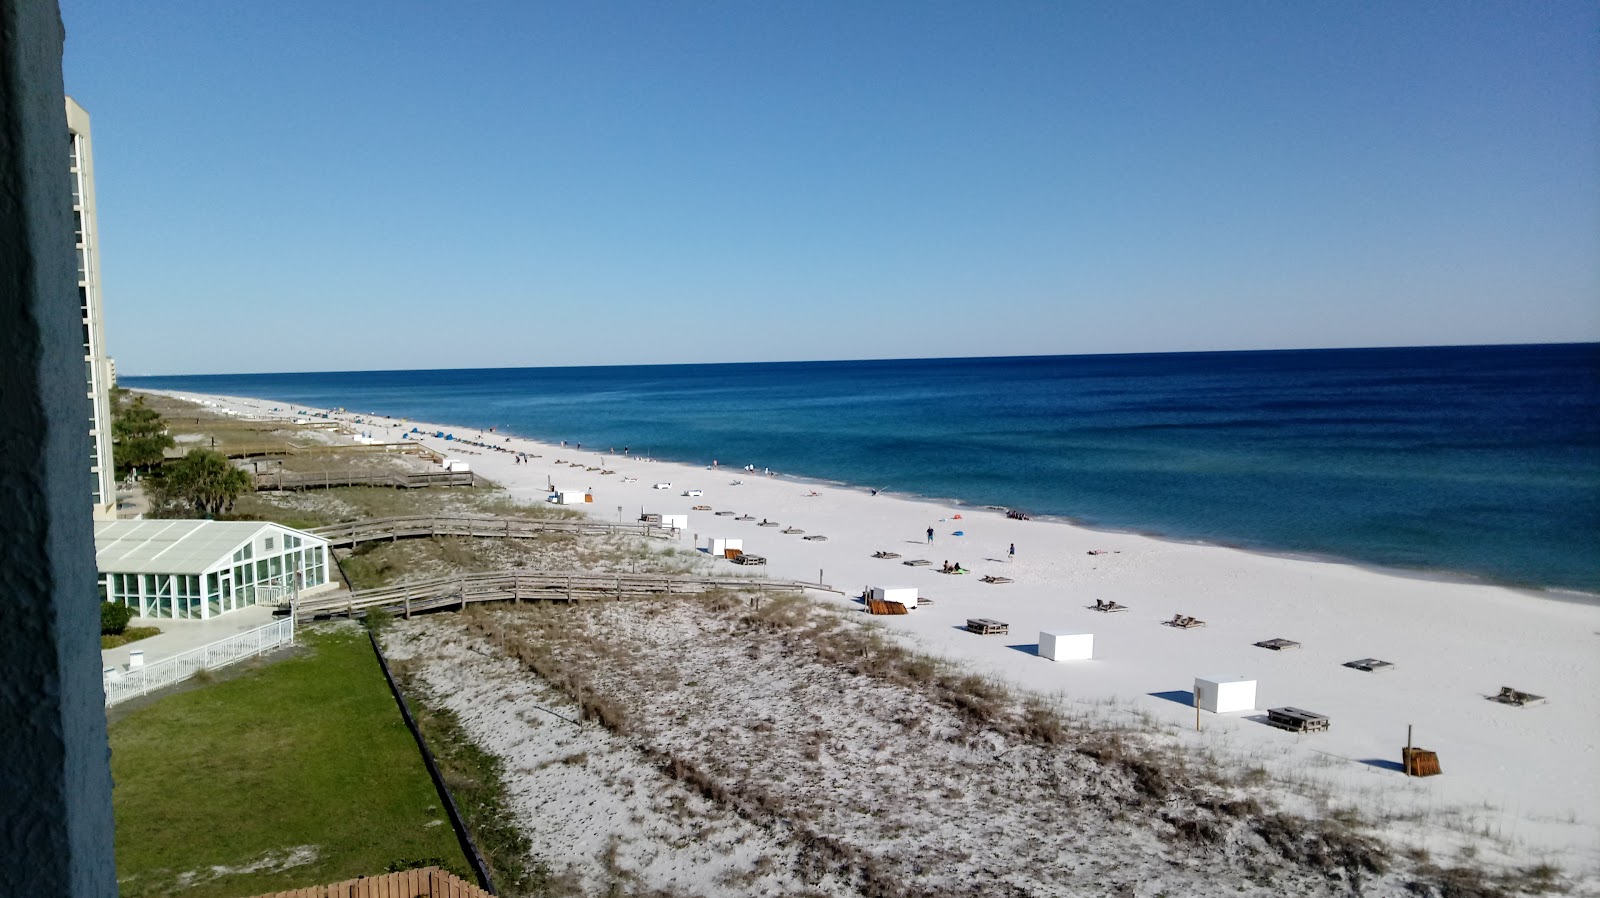 Photo of Perdido key beach with turquoise pure water surface